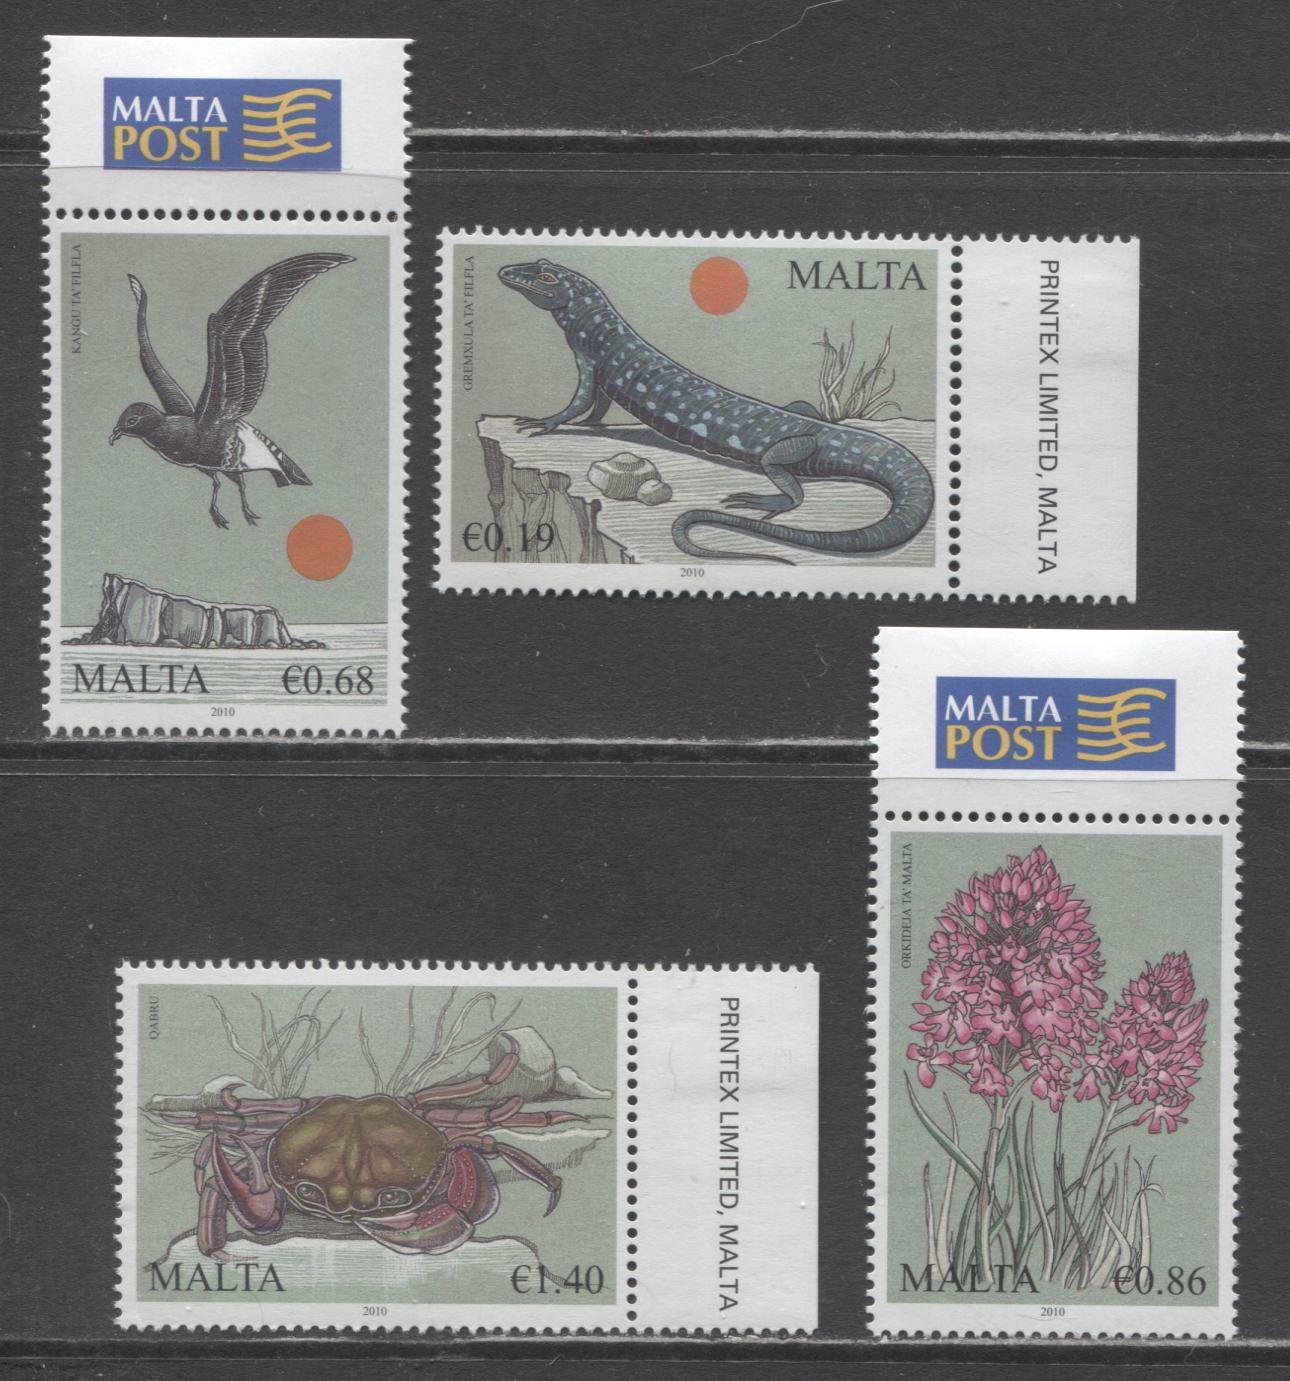 Lot 69 Malta SC#1414-1417 2010 International Year Of Biodiversity Issue, 4 VFNH Singles, Click on Listing to See ALL Pictures, 2017 Scott Cat. $10